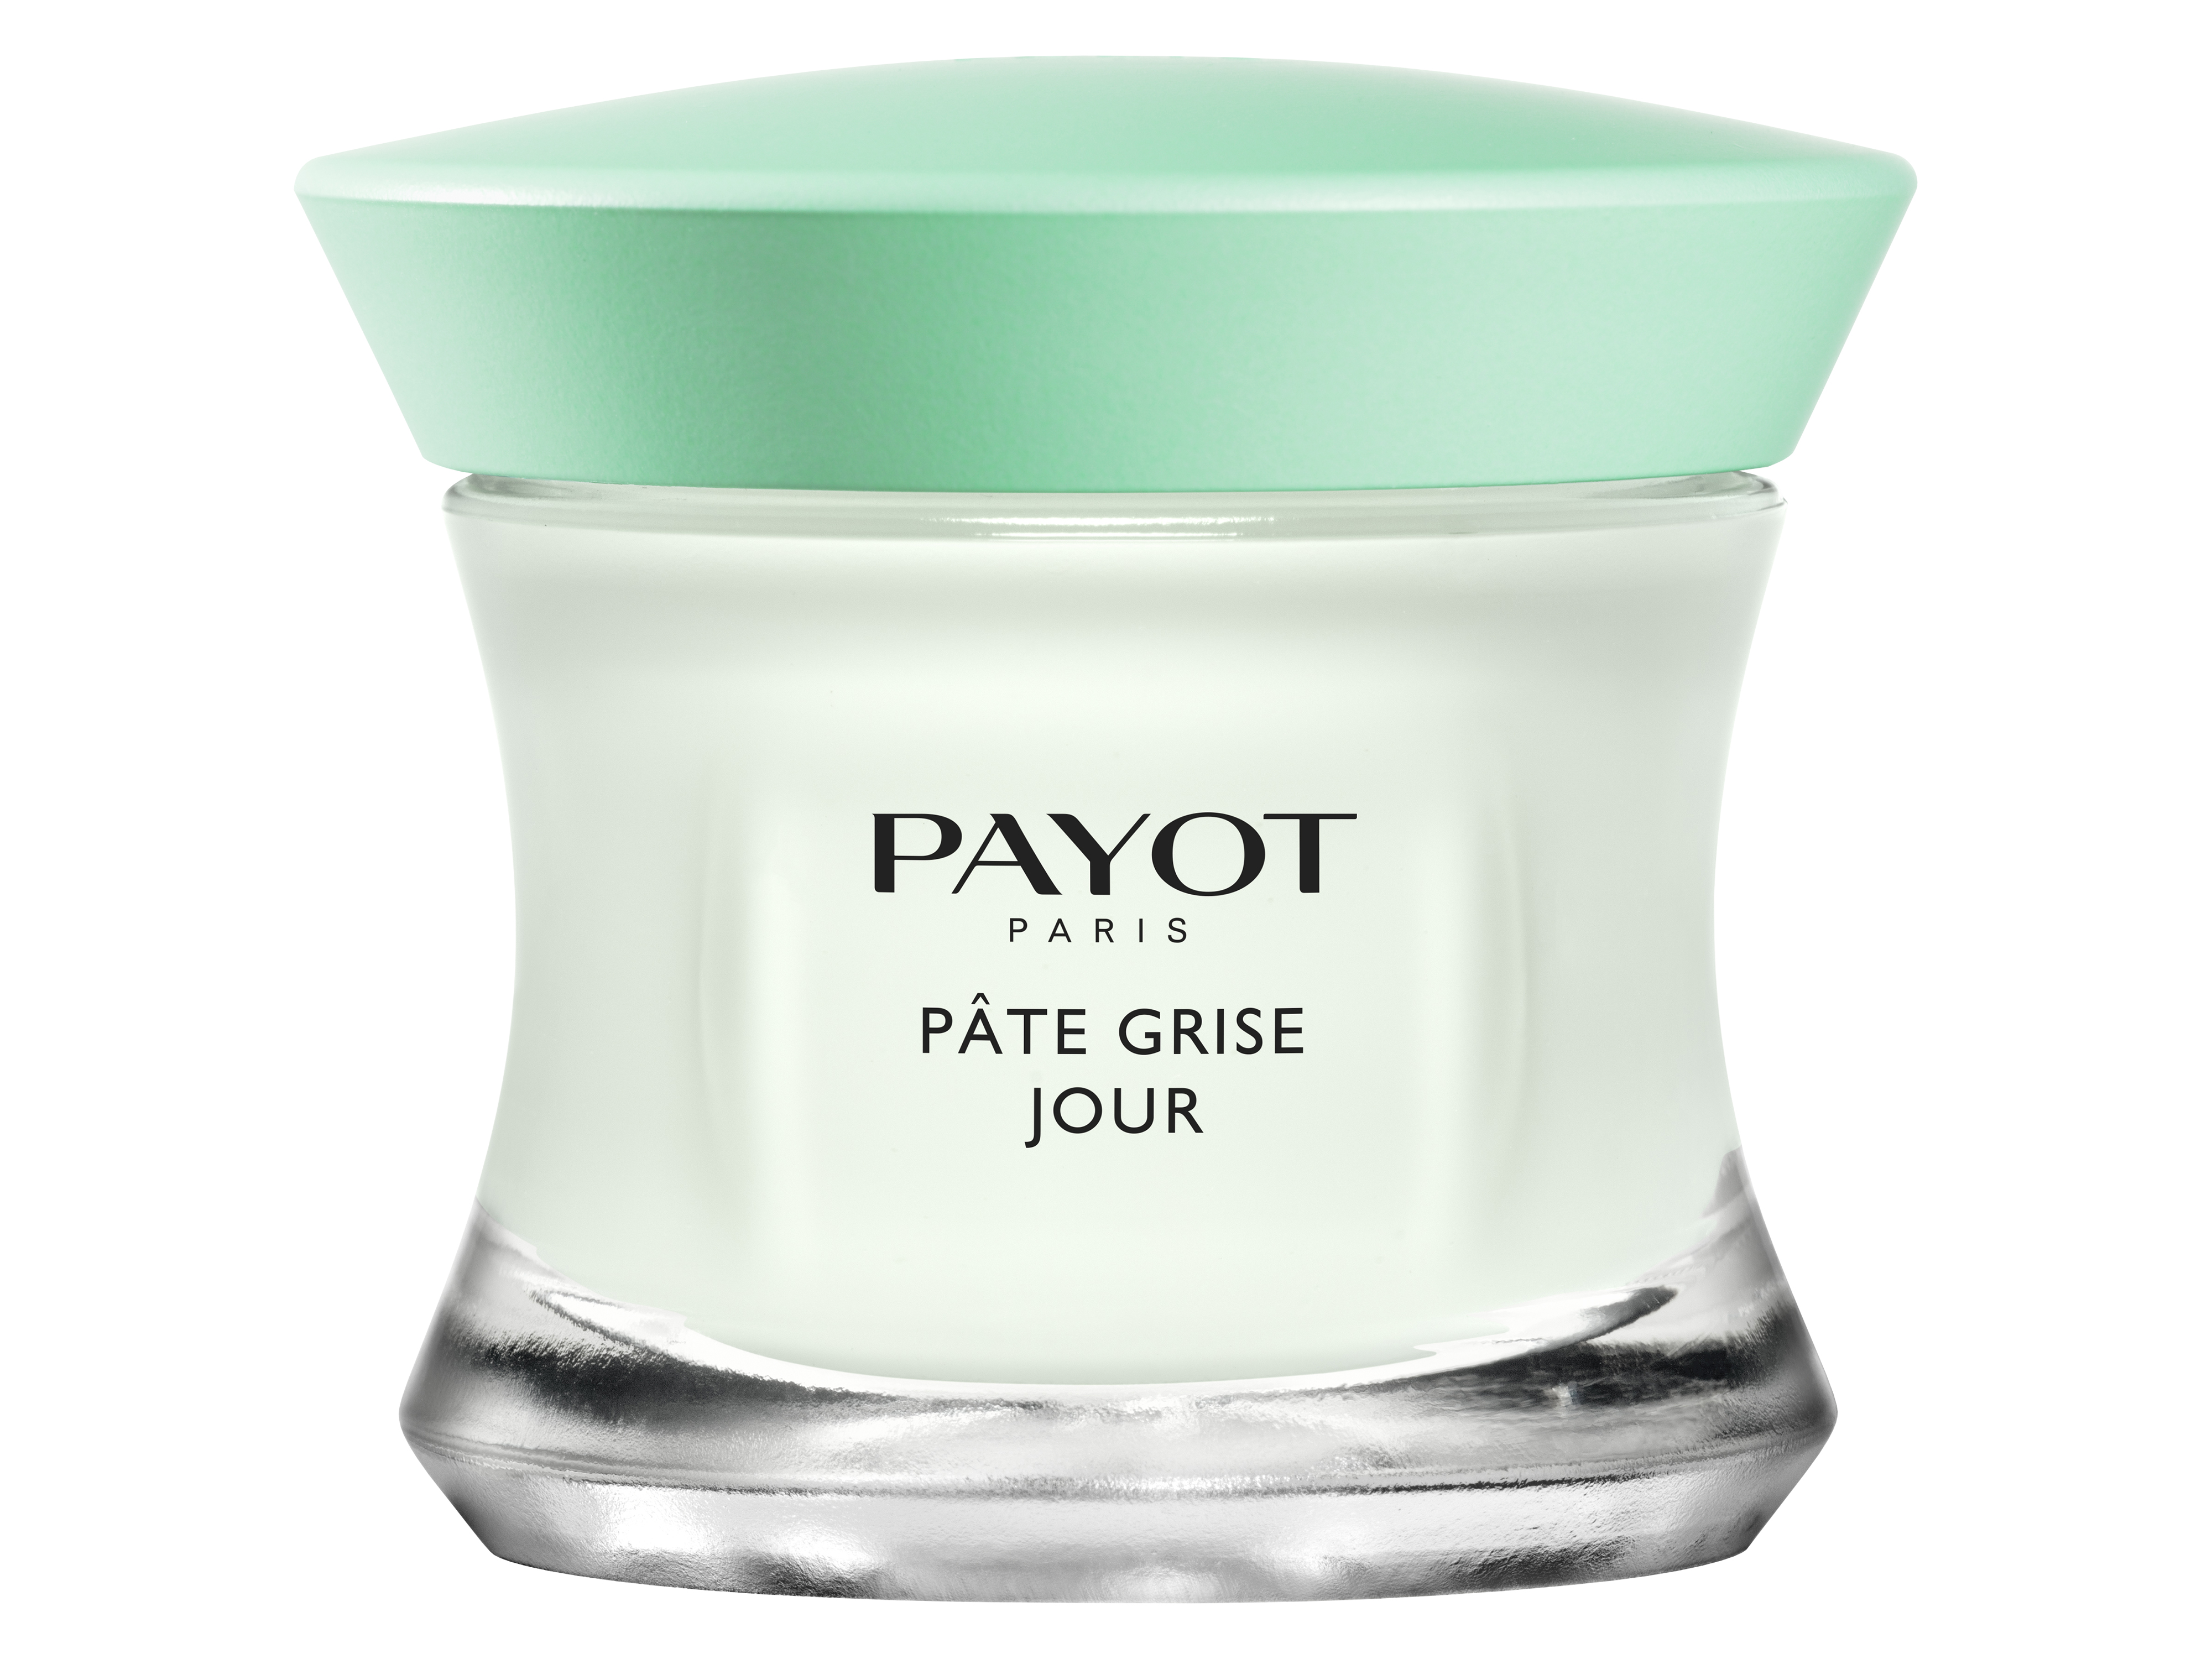 Payot Pate Grise Jour, 50 ml